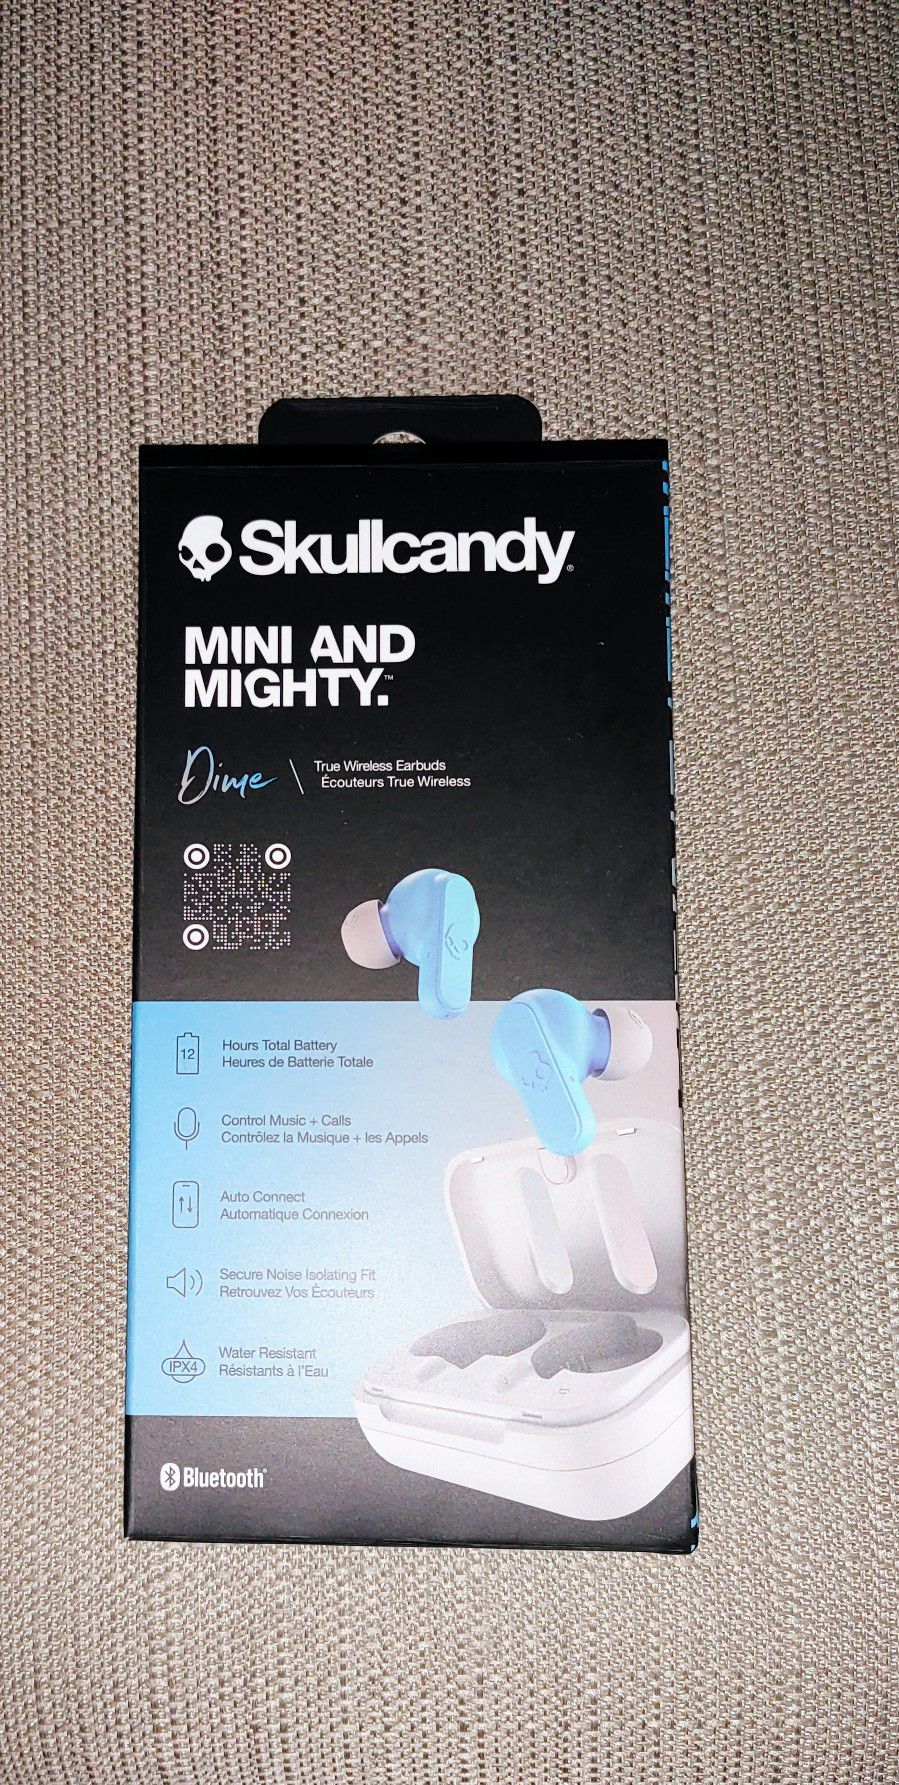 Skullcandy Mini and Mighty WIRELESS Earbuds Bluetooth: Model Dime 